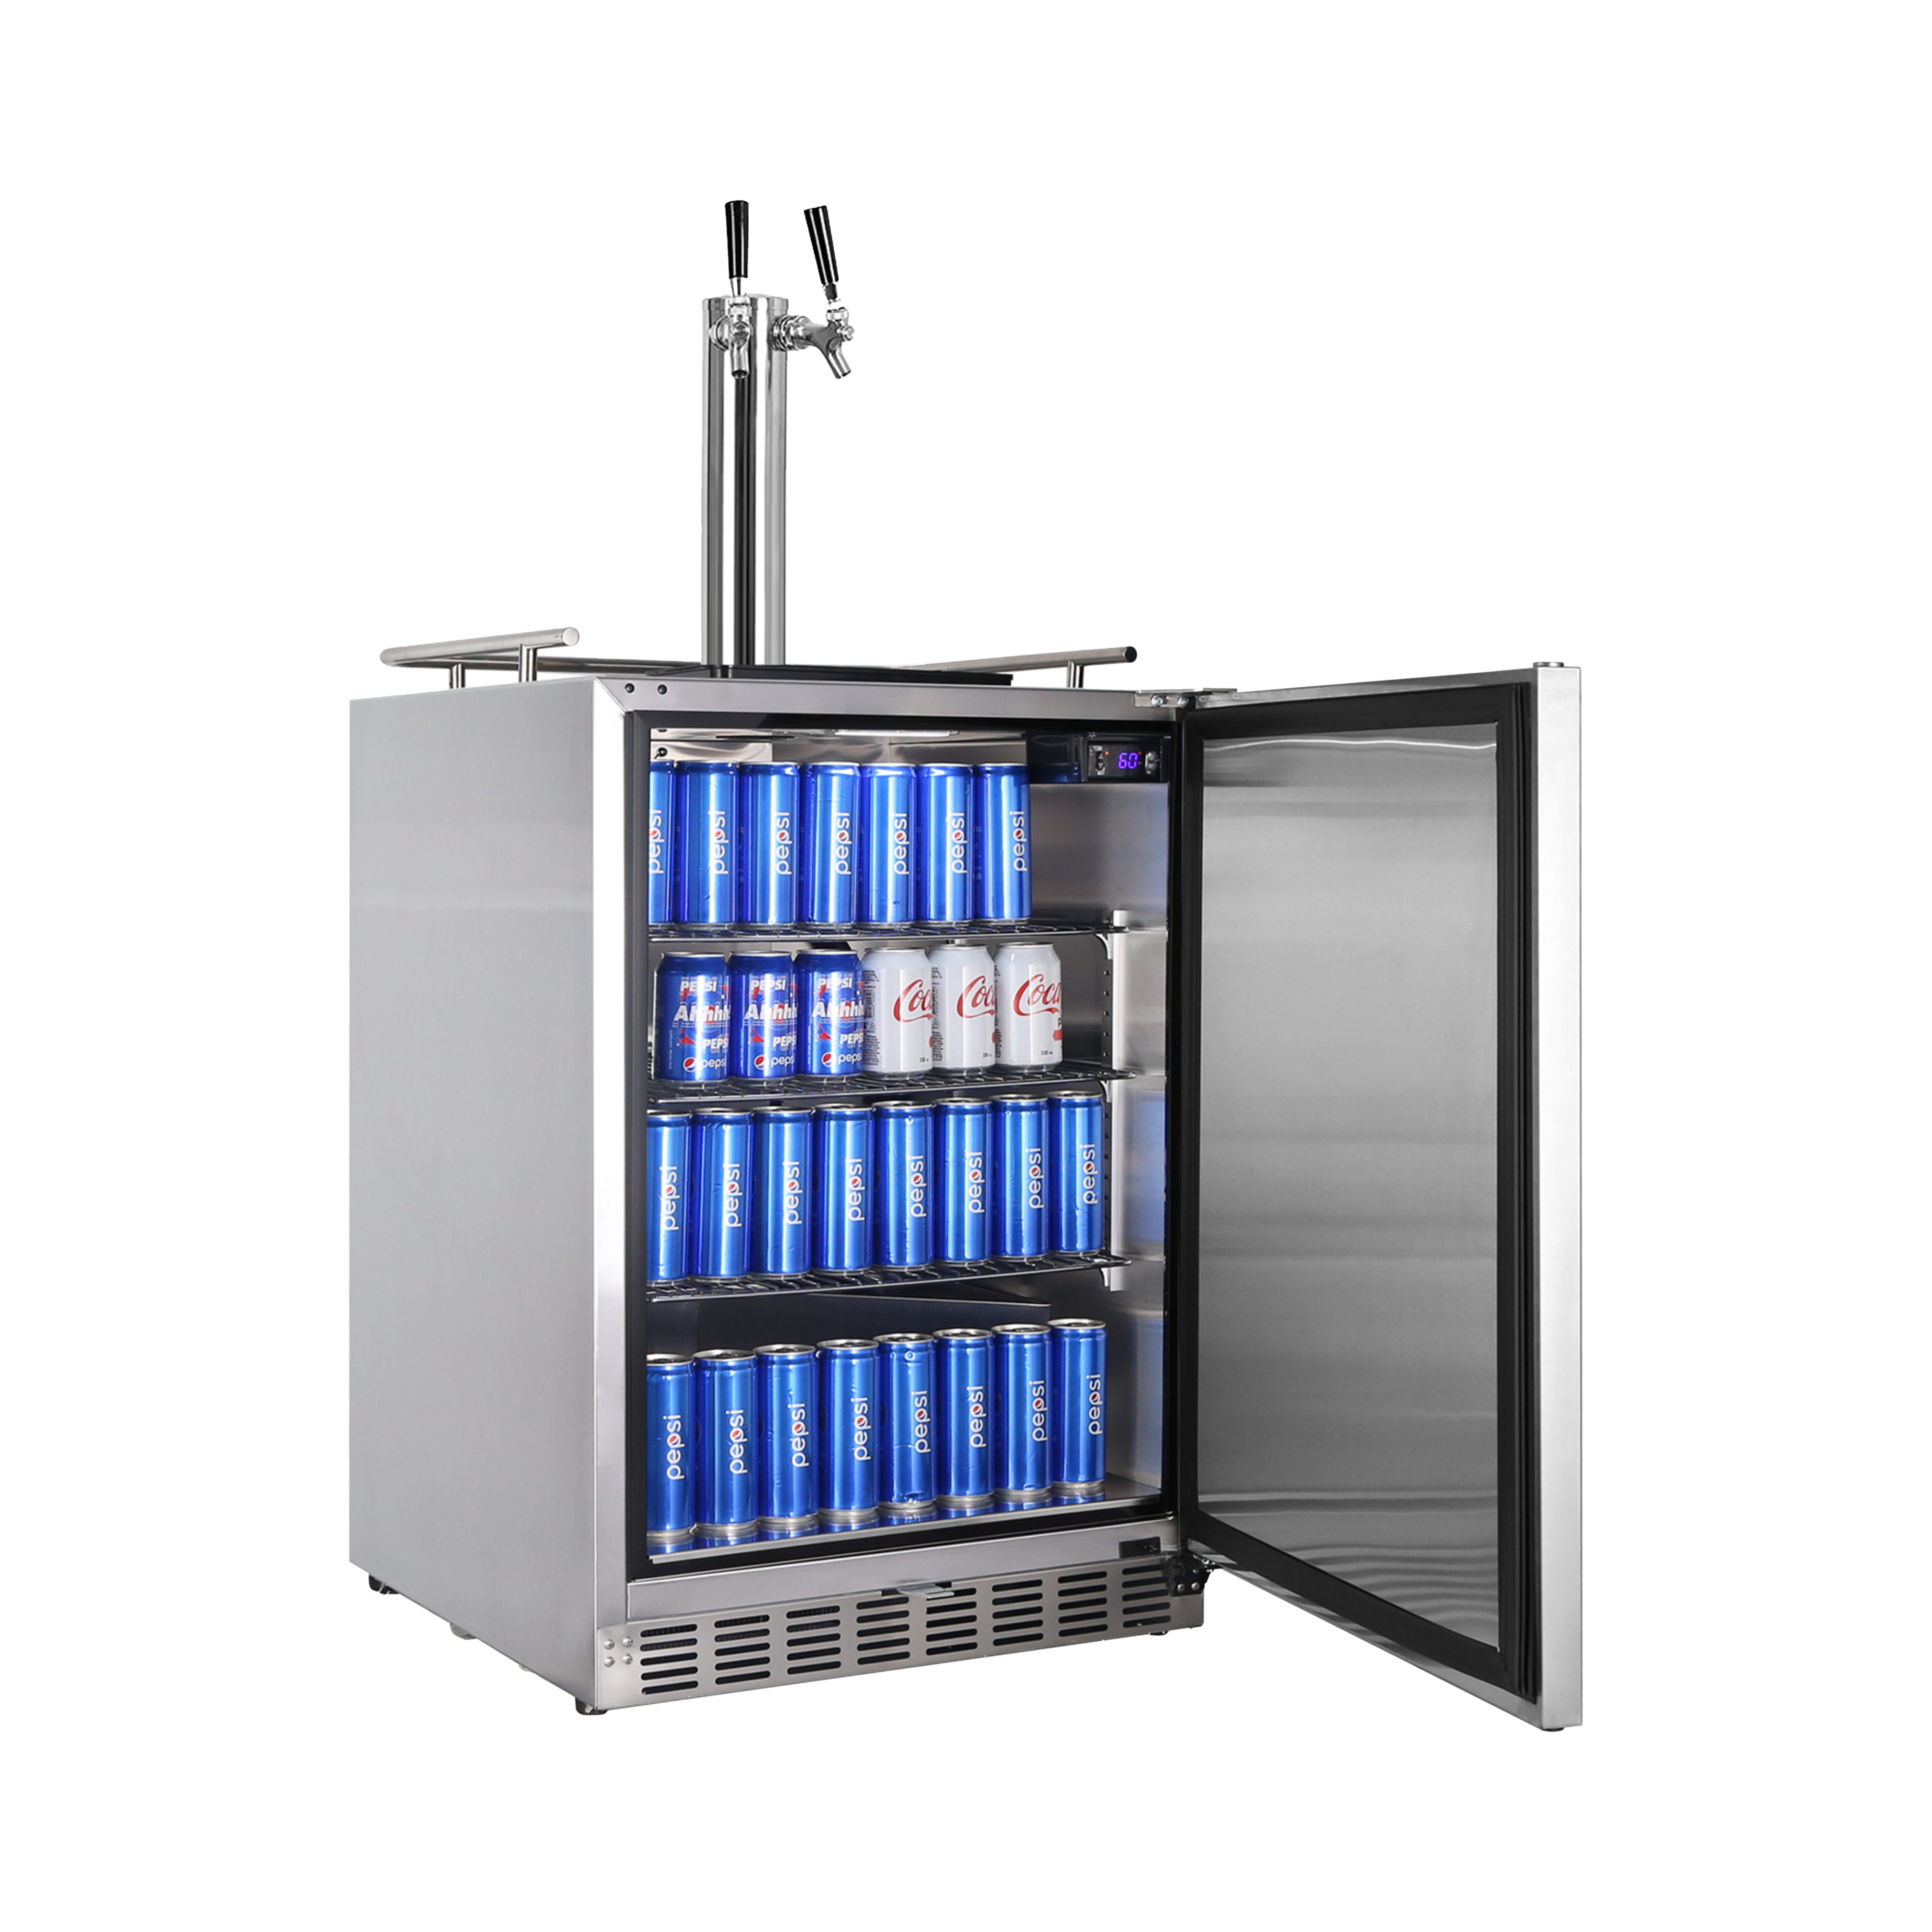 Side view of a 6.04 Cu Ft Undercounter Kegerator Outdoor Beverage Fridge with the door open, revealing fully stocked interior space with beverage cans.